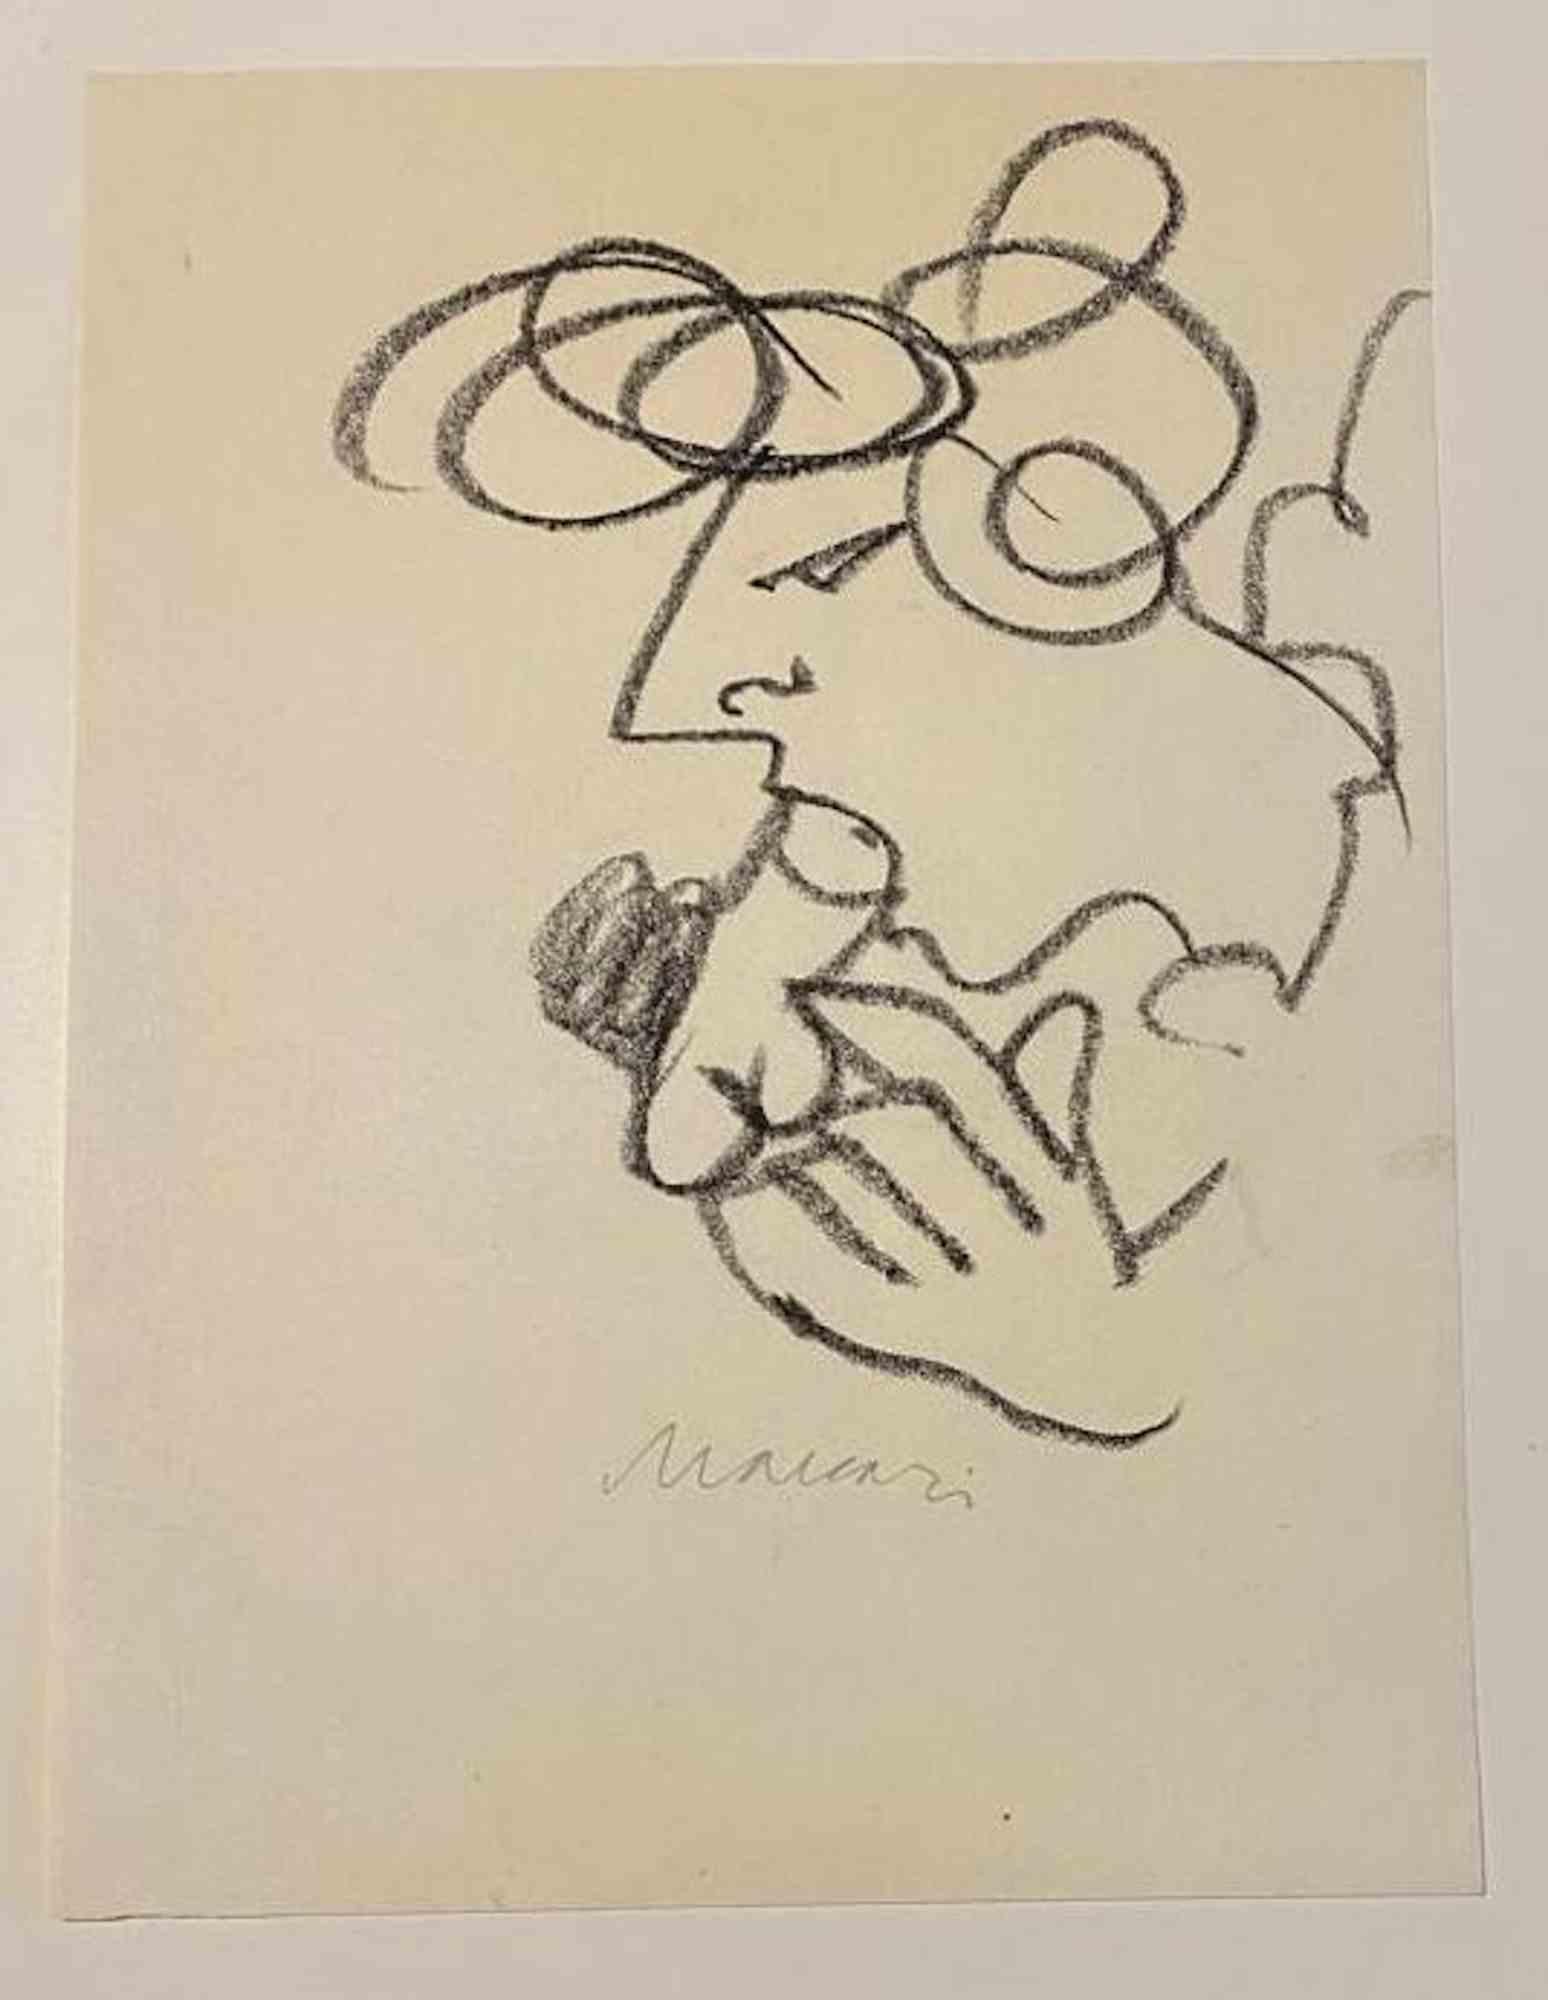 Erotic Composition is a charcoal Drawing realized by Mino Maccari  (1924-1989) in the Mid-20th Century.

Hand-signed on the lower.

Good conditions.

Mino Maccari (Siena, 1924-Rome, June 16, 1989) was an Italian writer, painter, engraver and